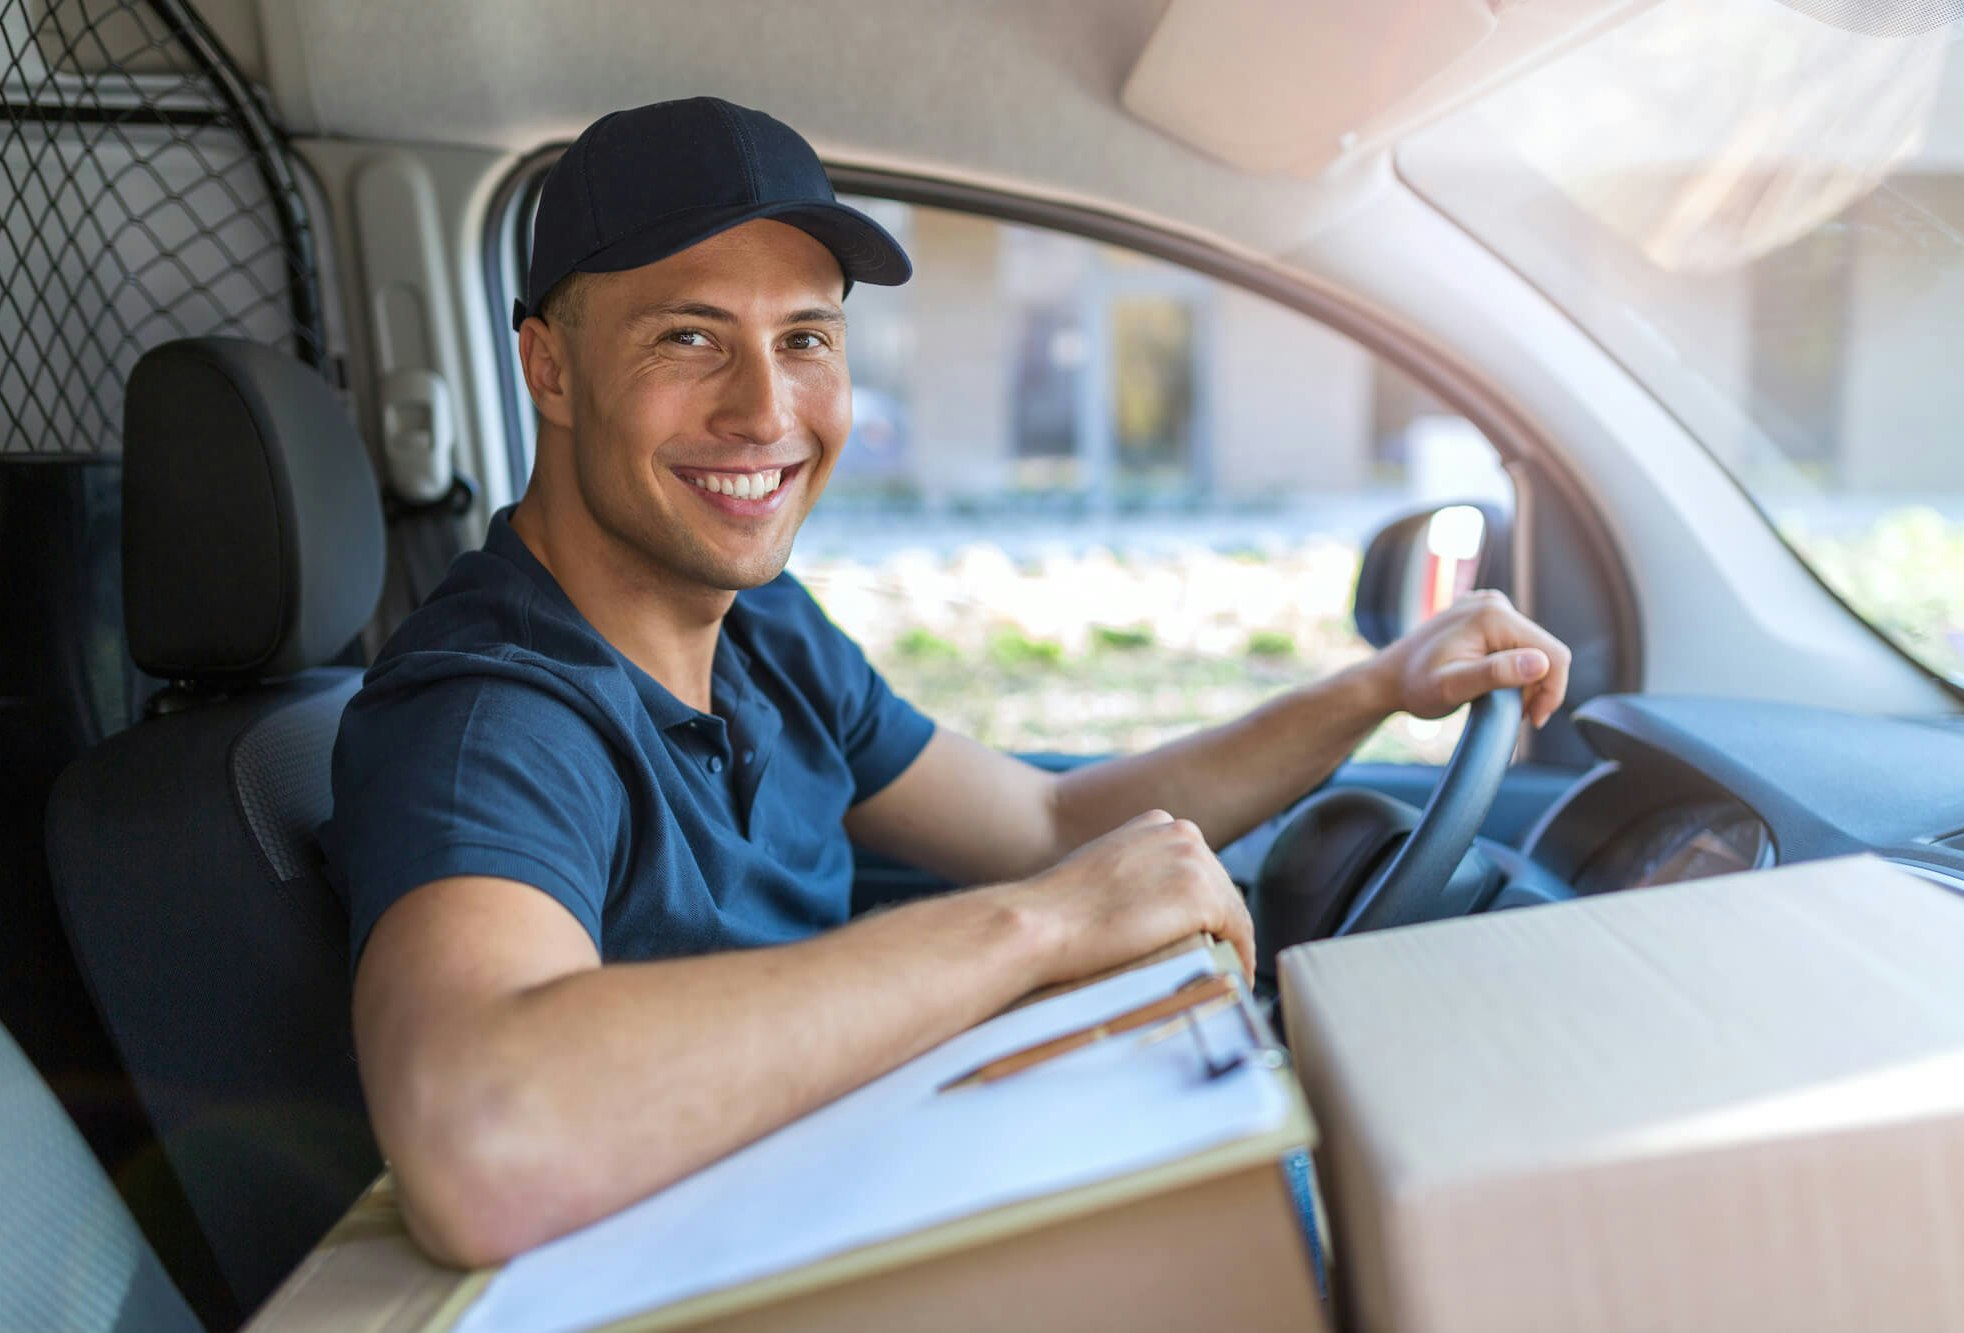 Portrait of a male driver in the driver's seat of a van. He is looking at the camera and sitting next to some packages.